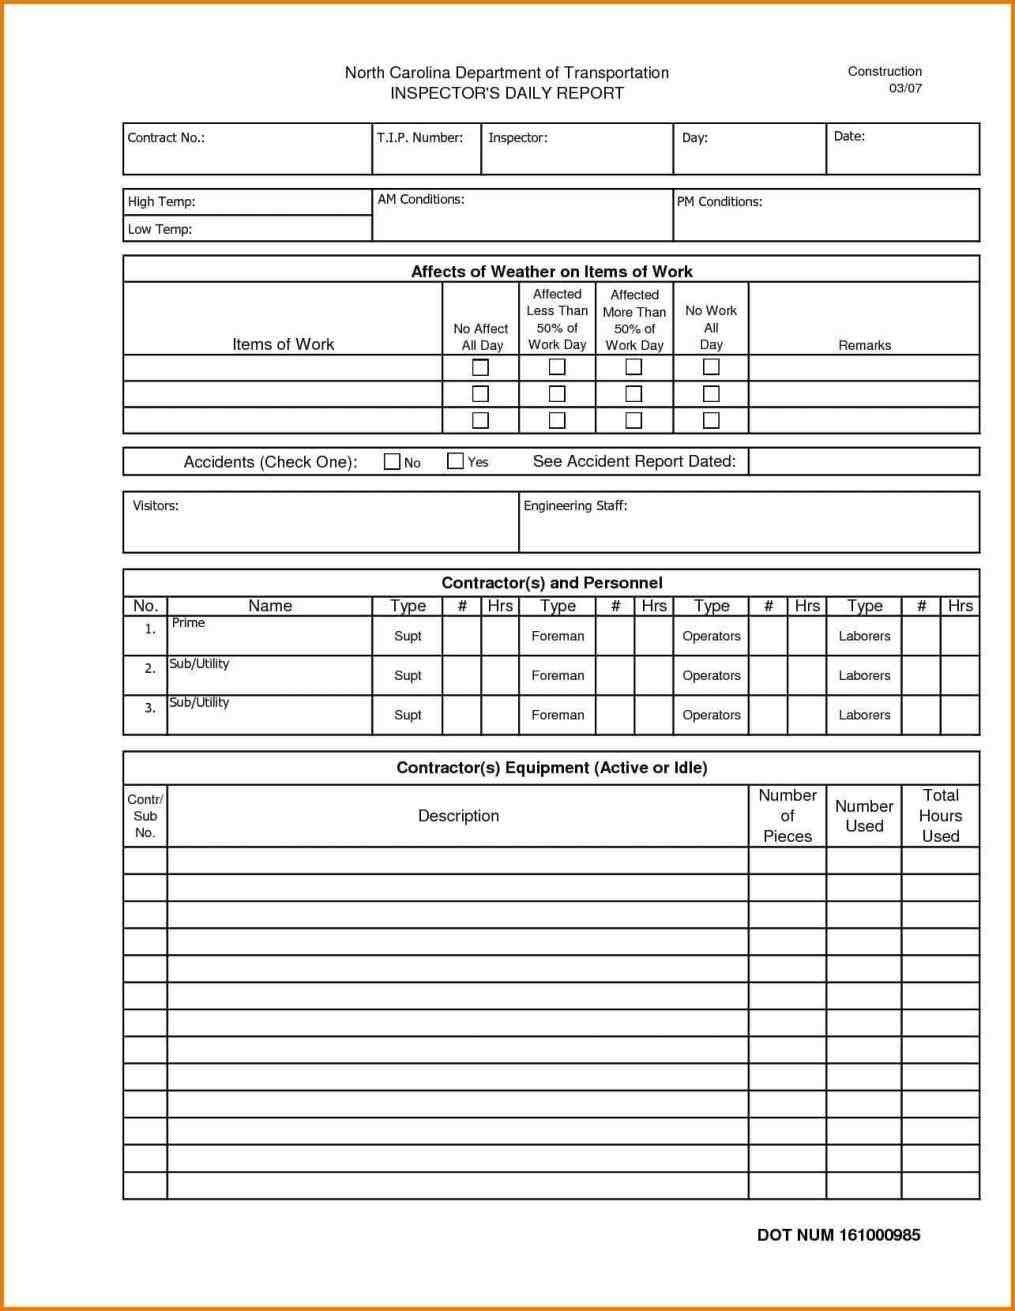 Template expense report template new free spreadsheet templates monthly job resumes word monthly Monthly Expense Report Template expense report job